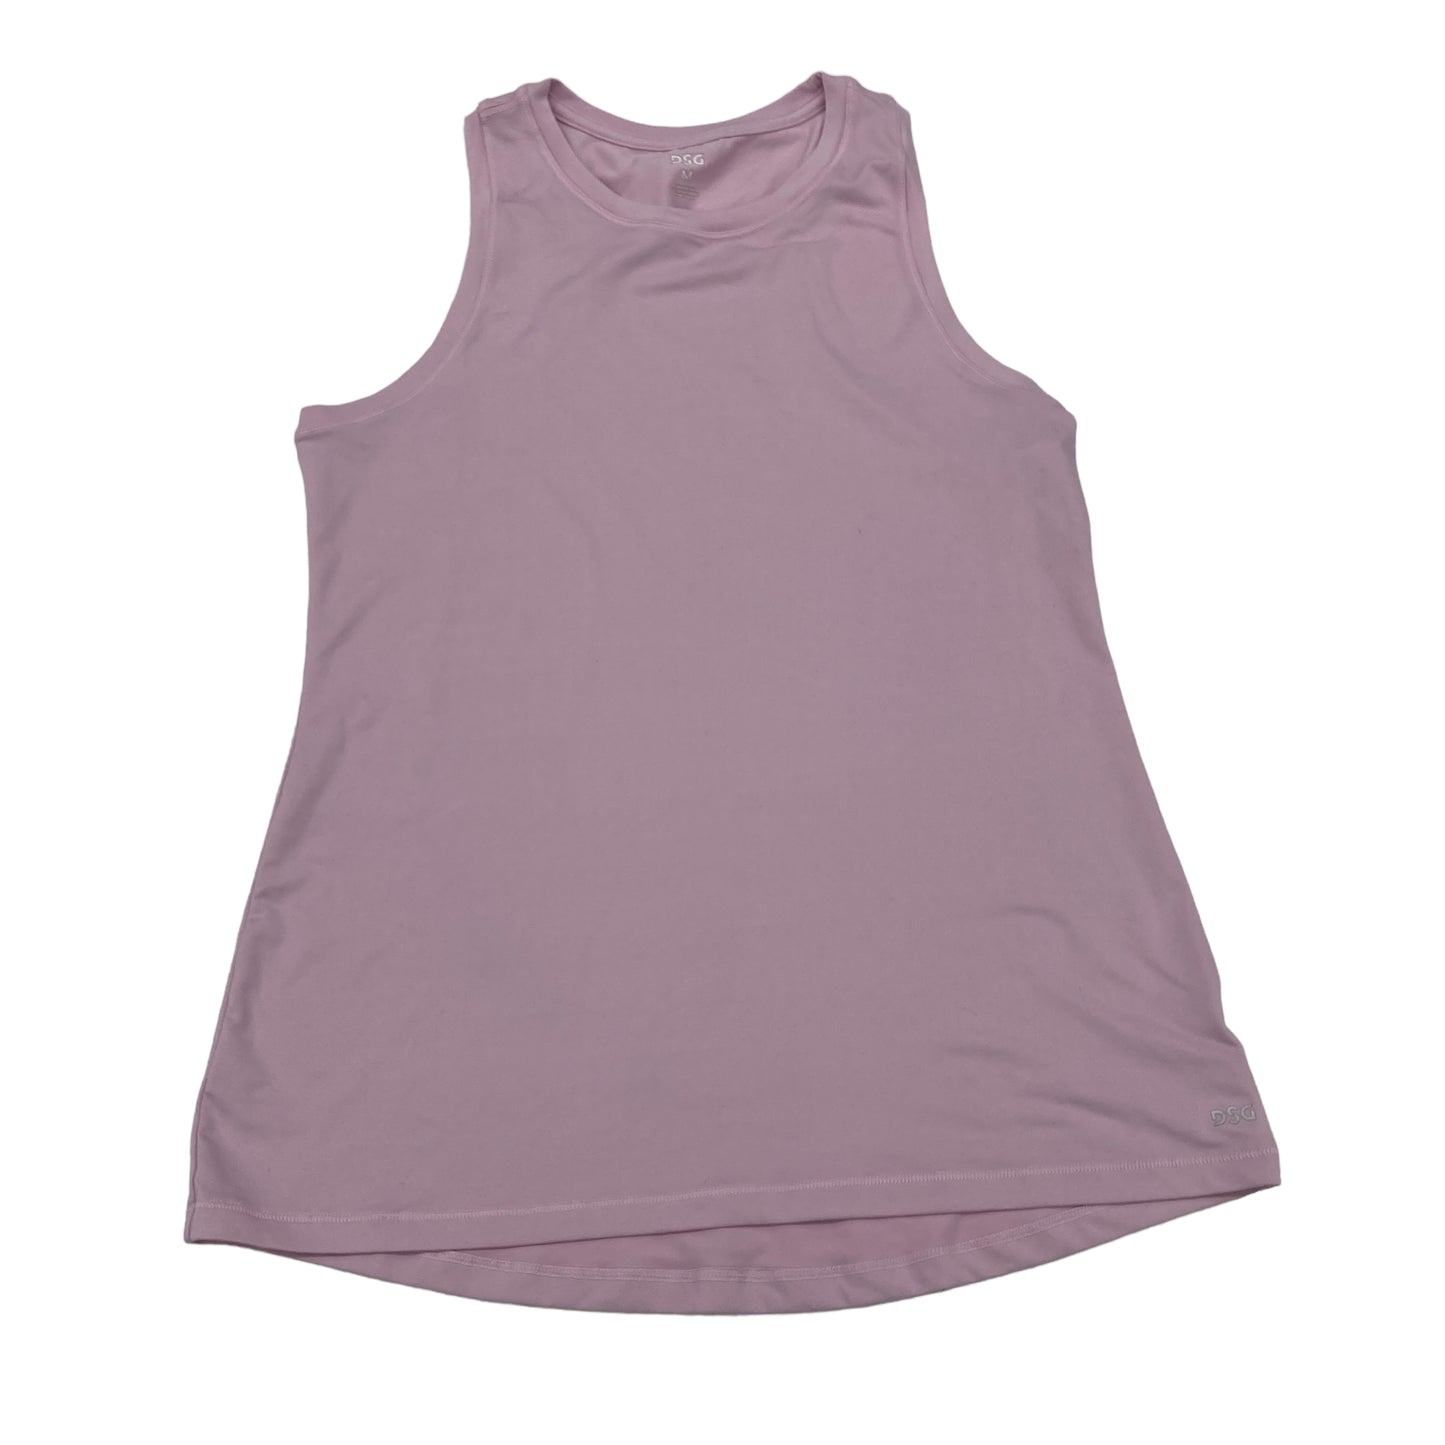 Athletic Tank Top By Dsg Outerwear  Size: M